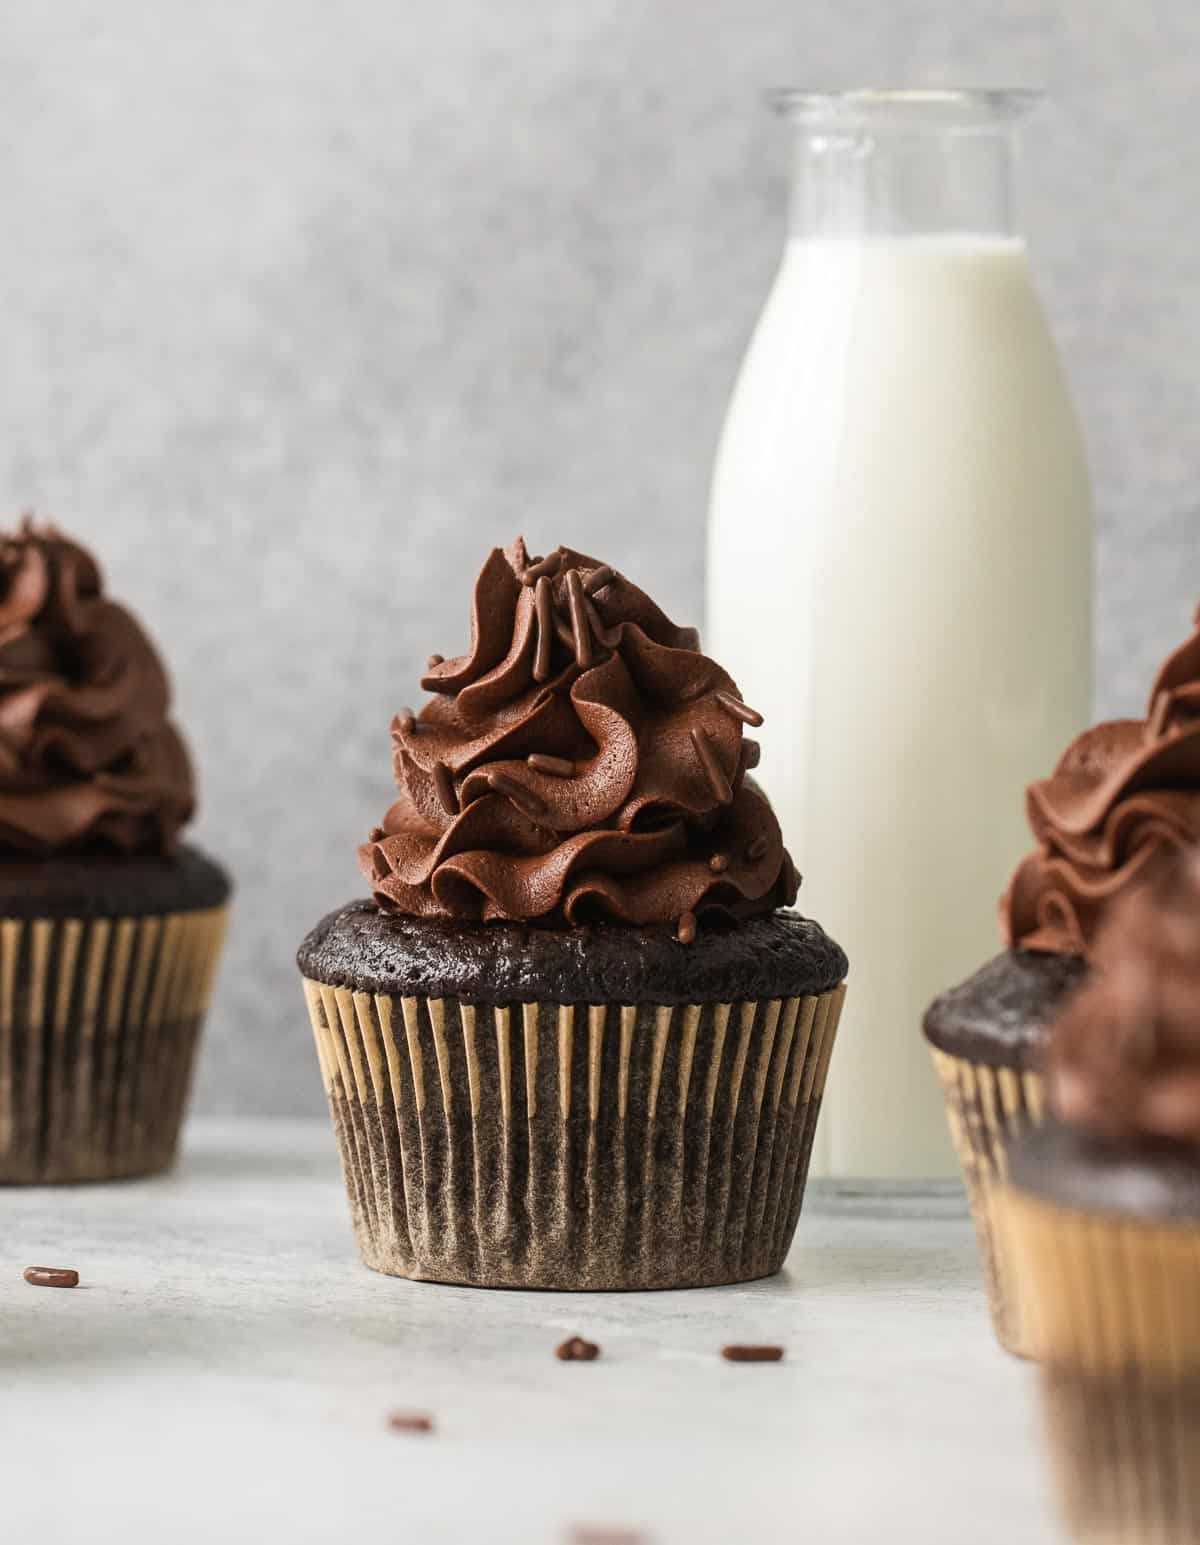 A gluten-free chocolate cupcake with a jar of milk in the background